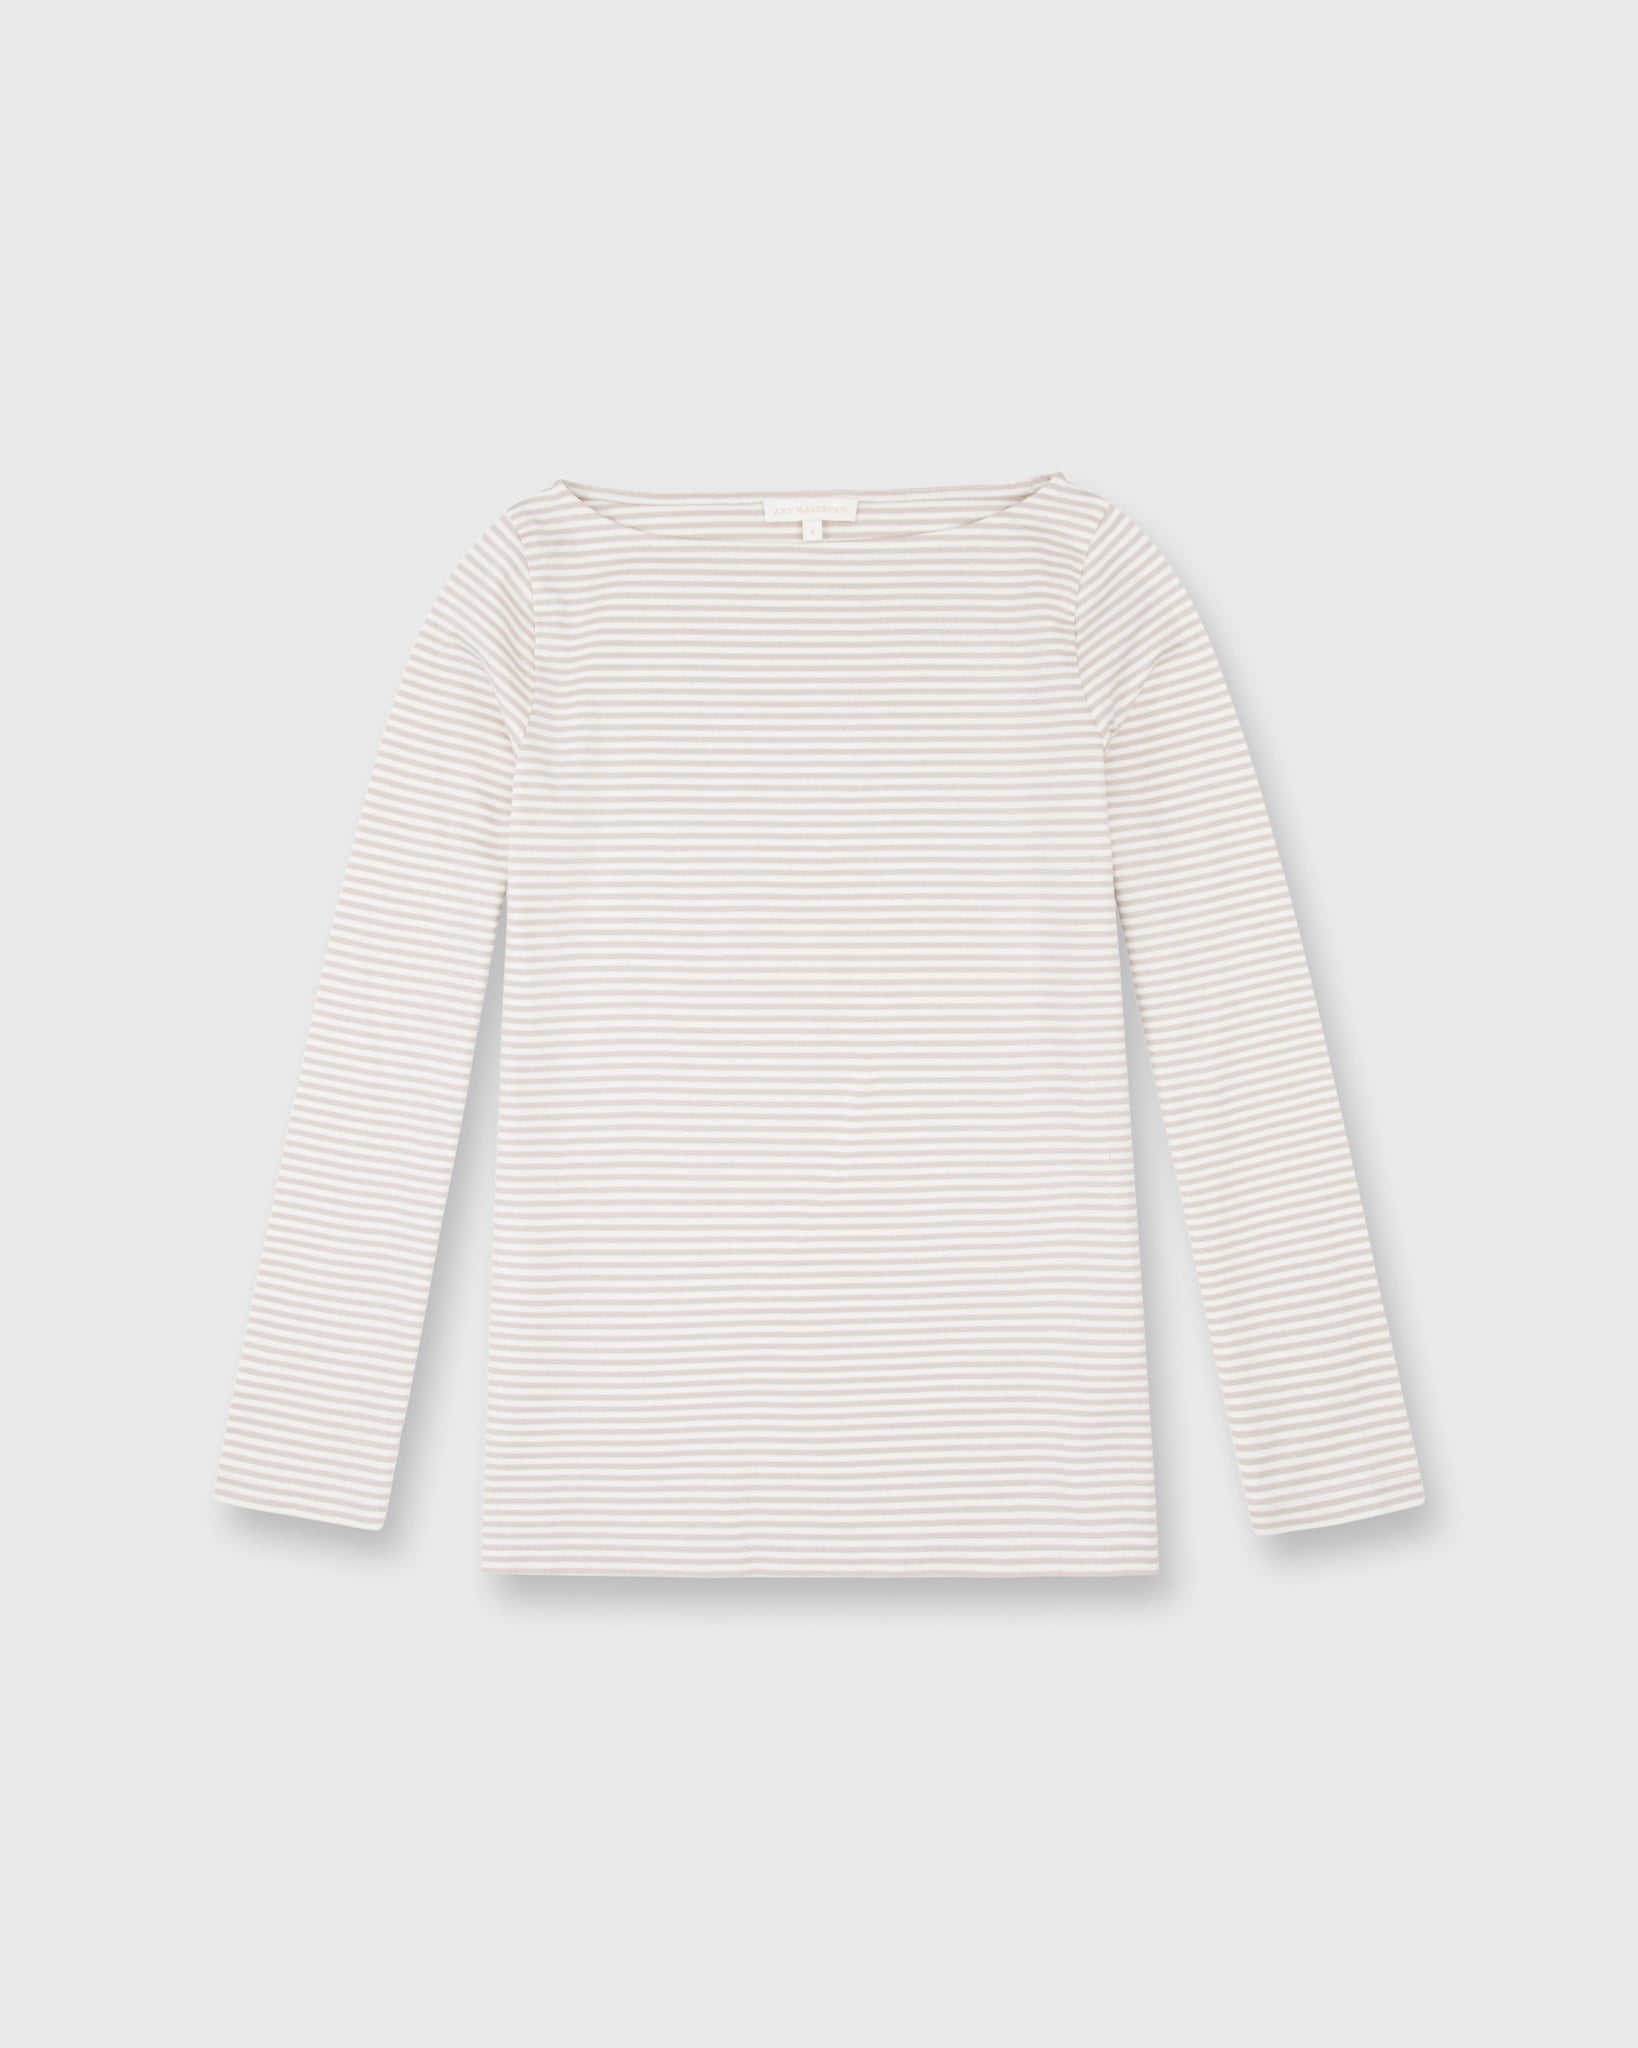 Long-Sleeved Boatneck Tee in Taupe/Ivory Stripe Compact Jersey